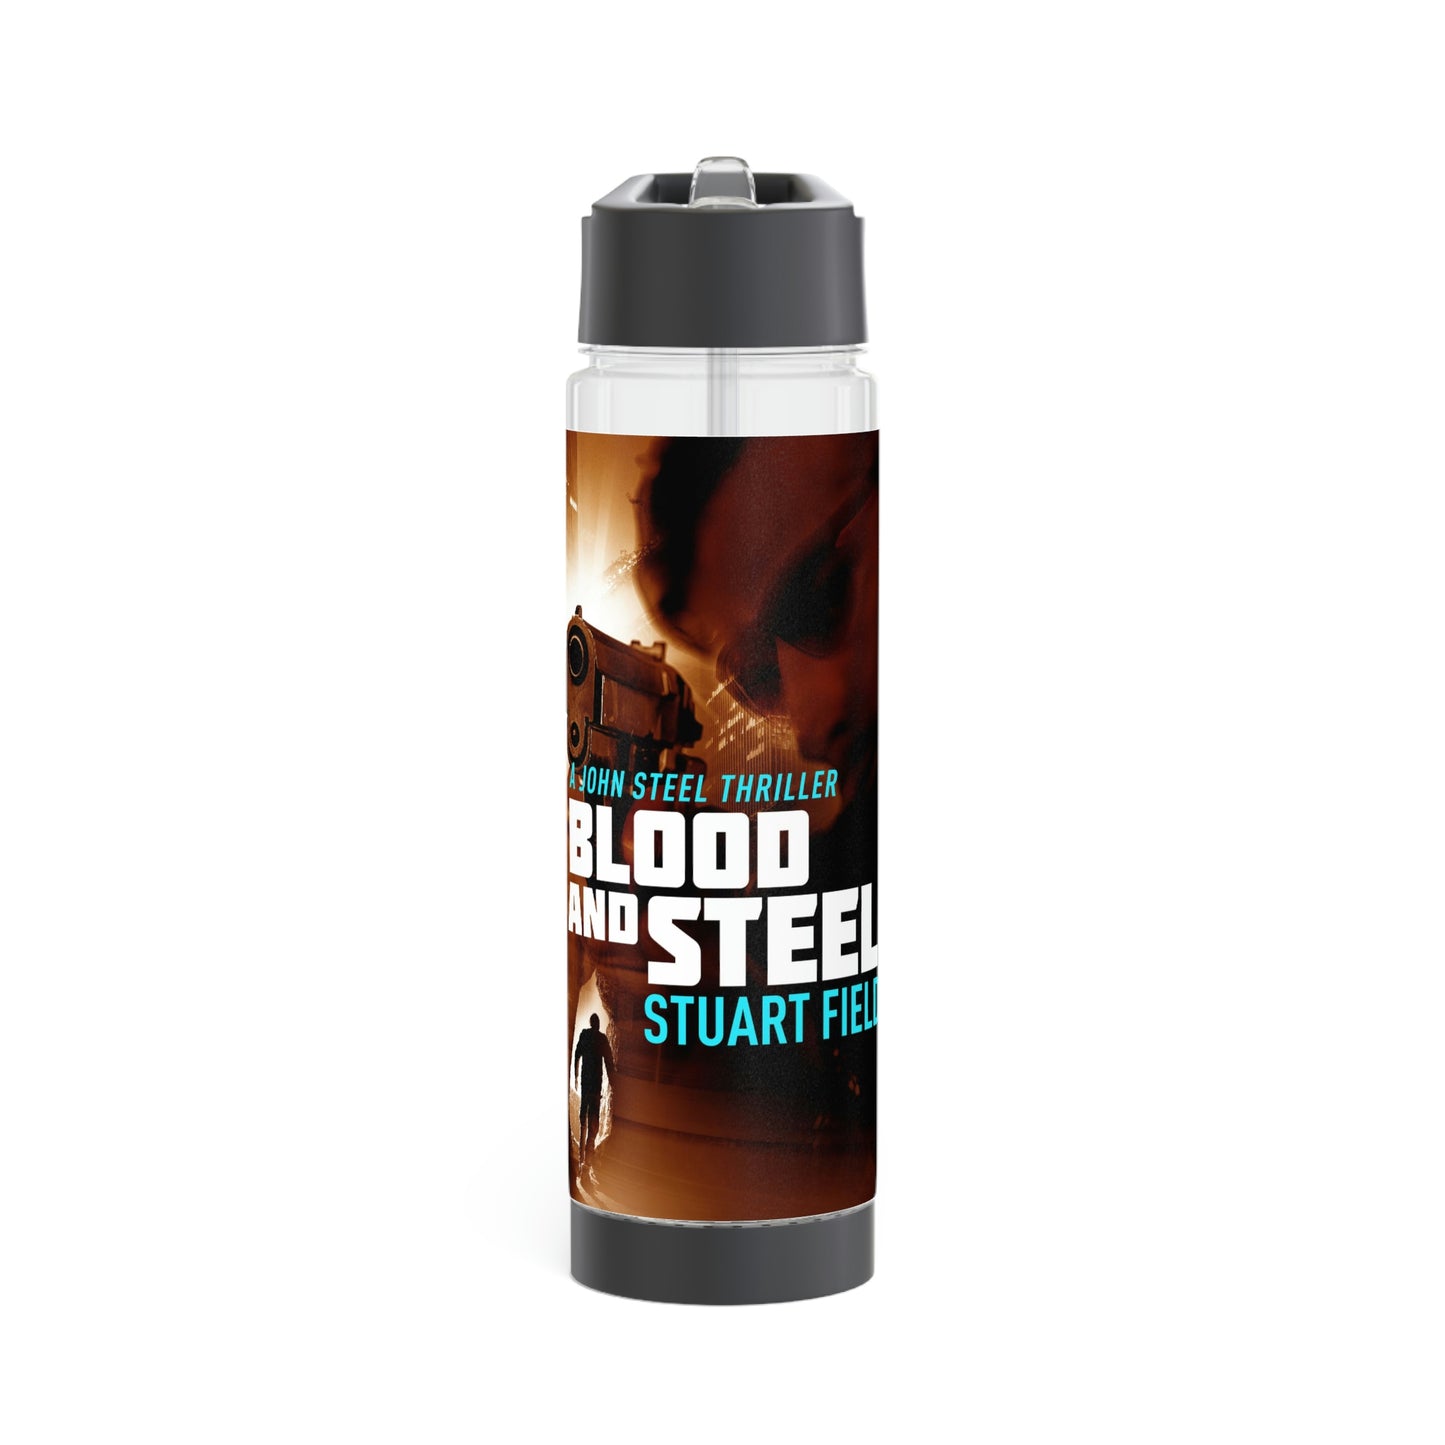 Blood And Steel - Infuser Water Bottle